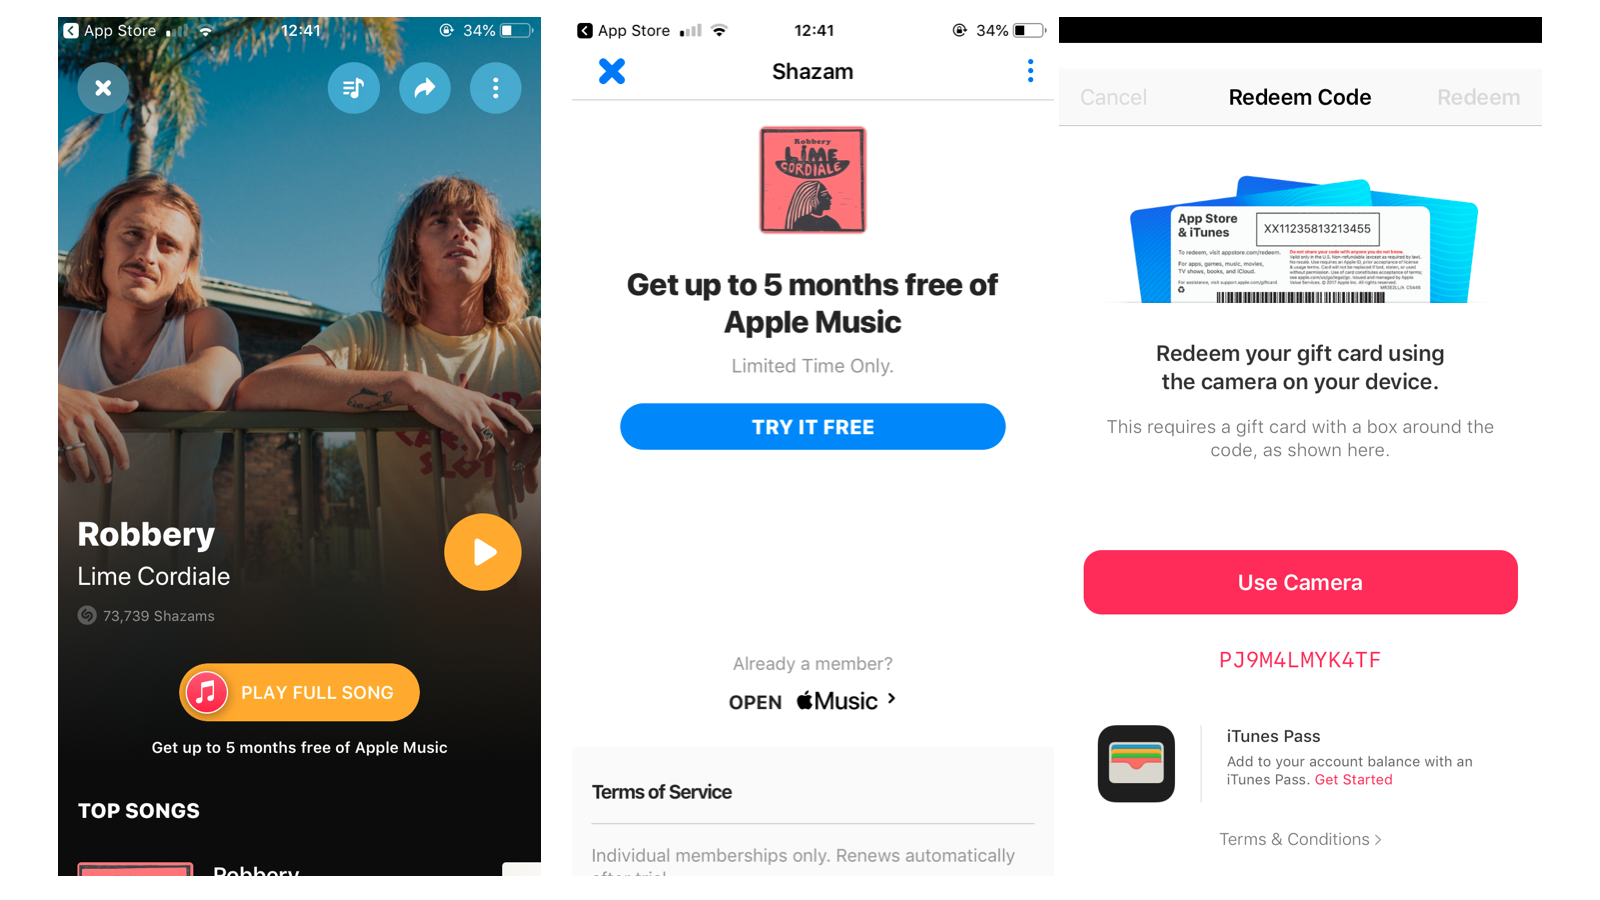 How to get five months Apple Music for free